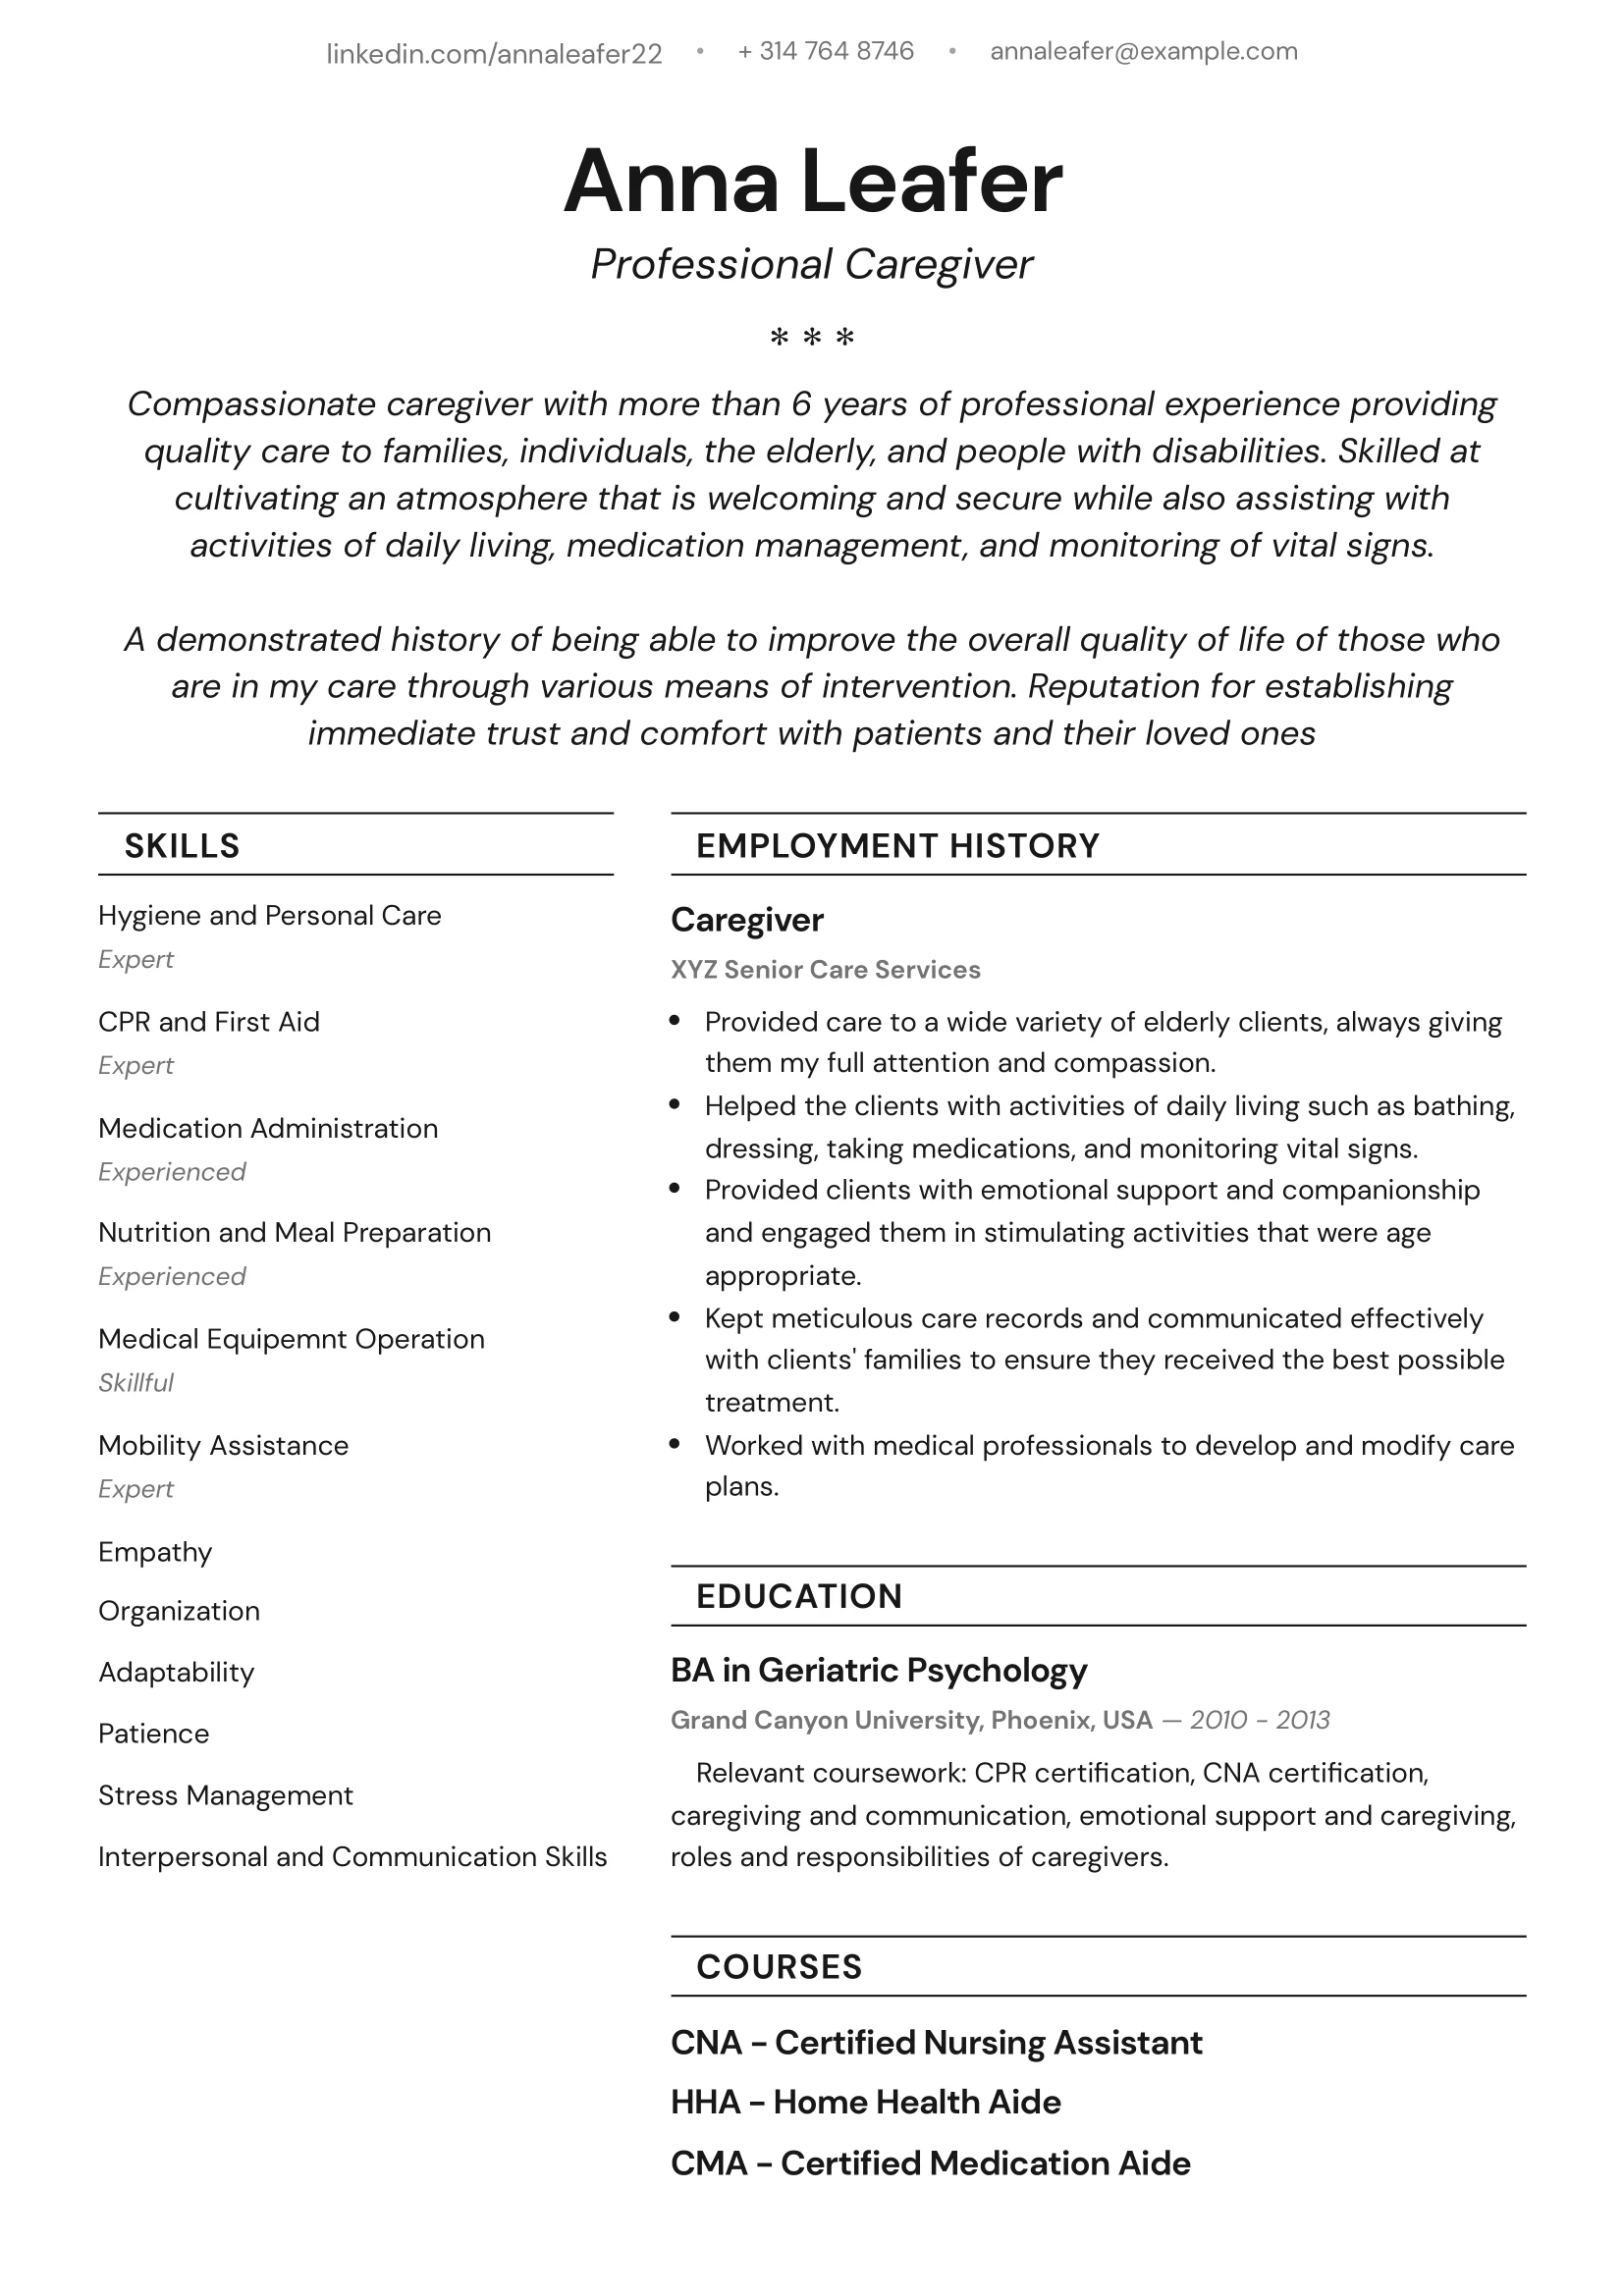 caregiver with experience